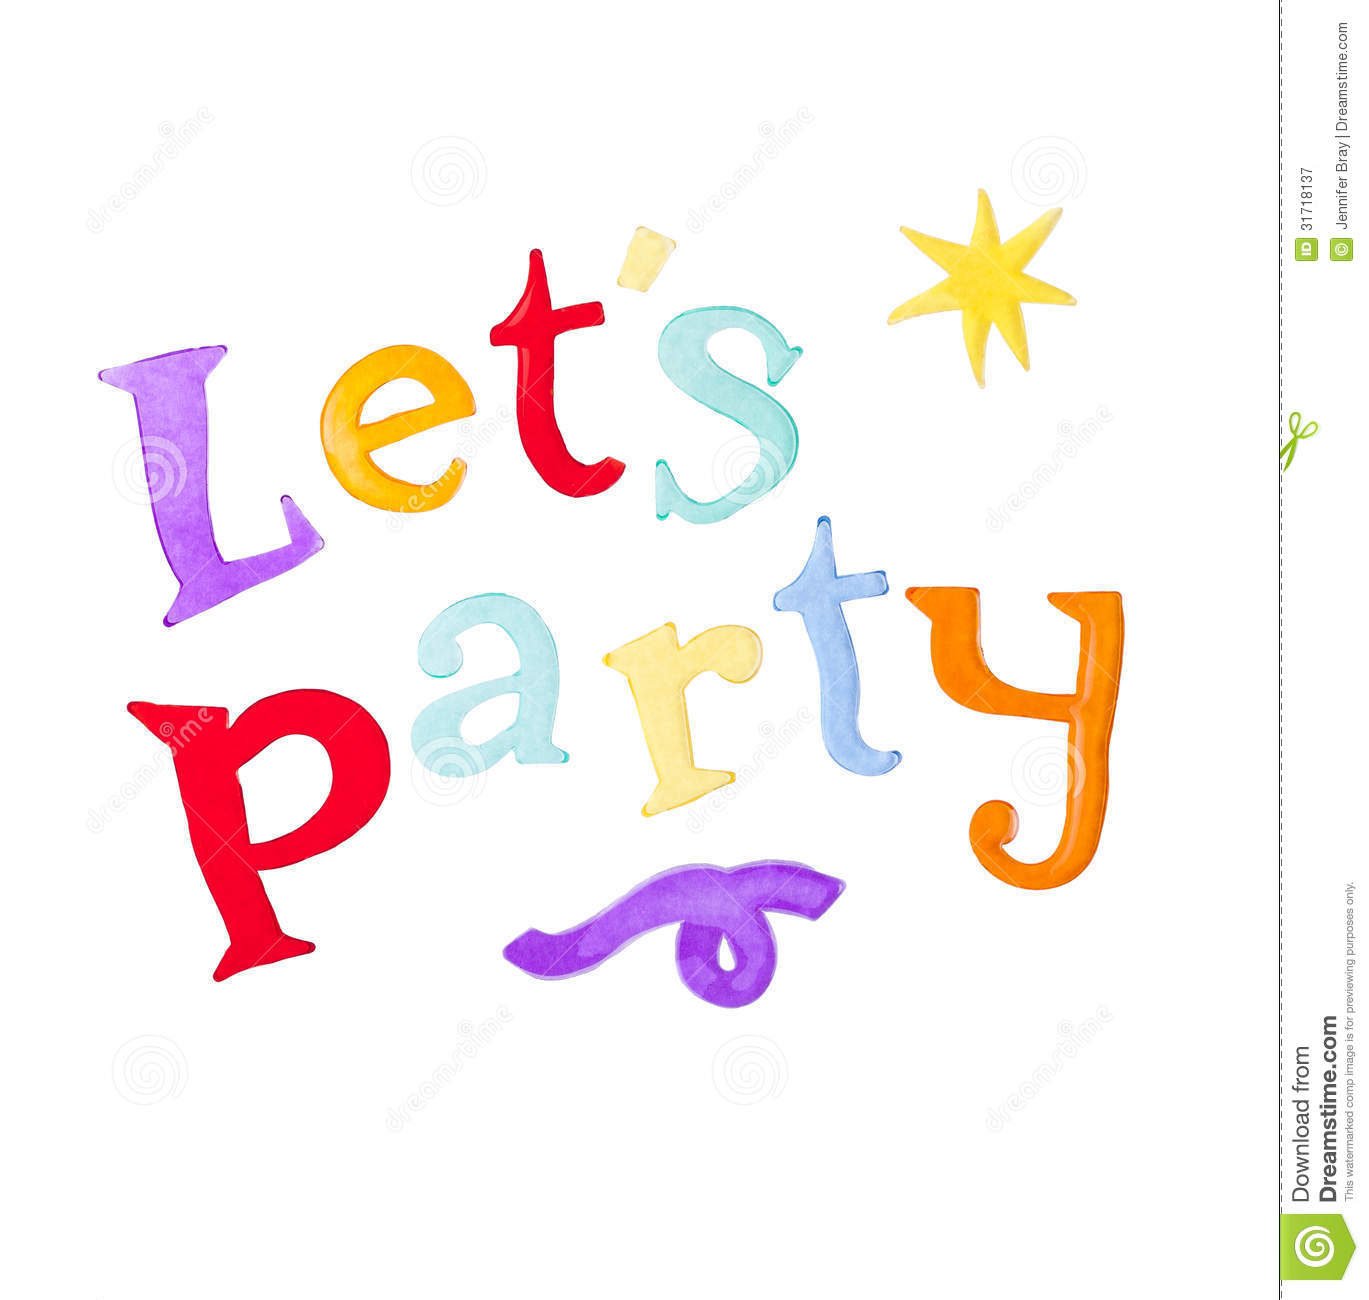 Let's Party Greeting Card